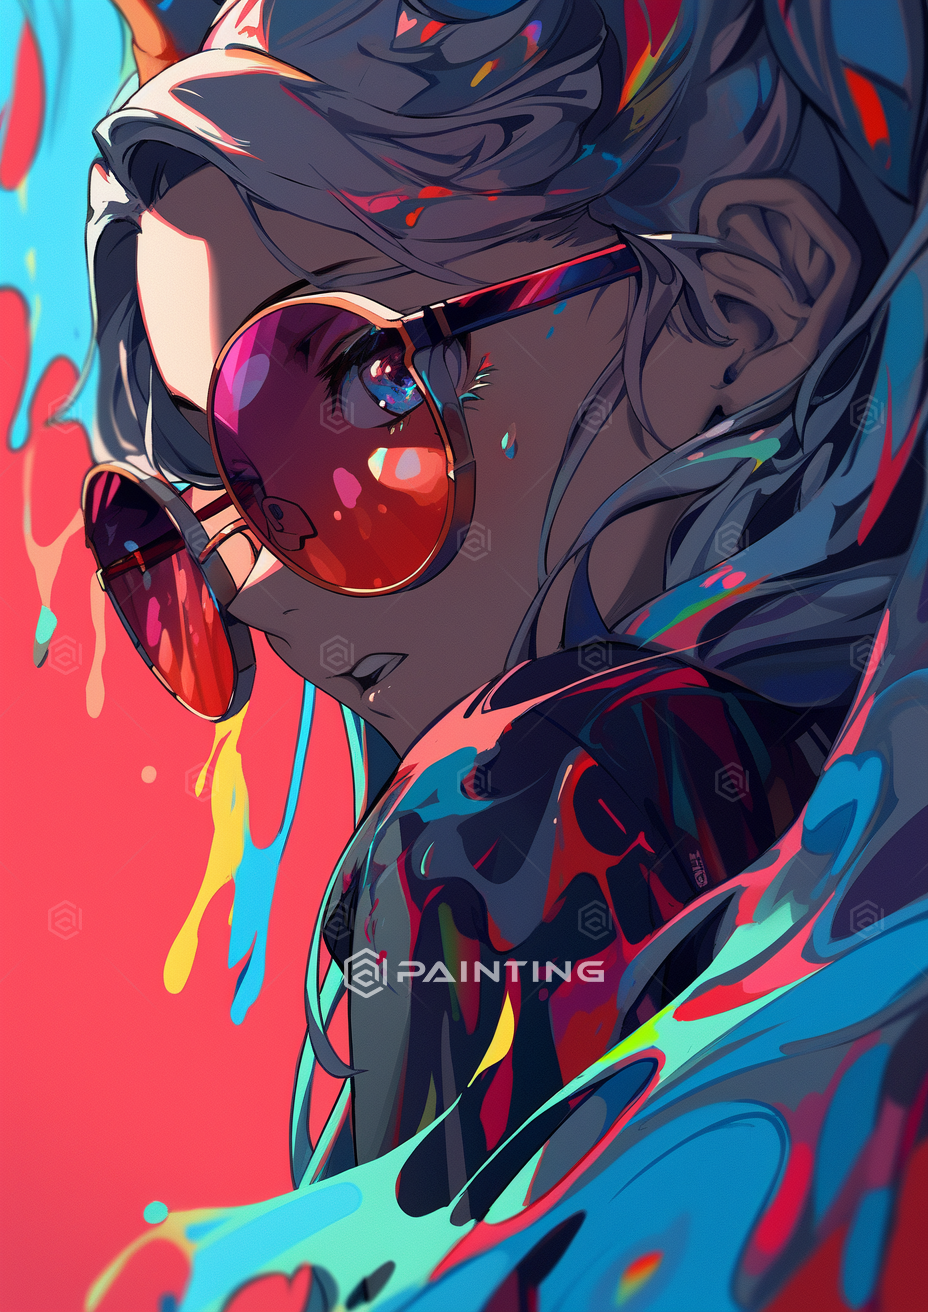 bright_anime_background_with_a_girl_wearing_sunglasses_in_t_c331ecde-fd4c-44fb-a85f-ad220e37520a.png